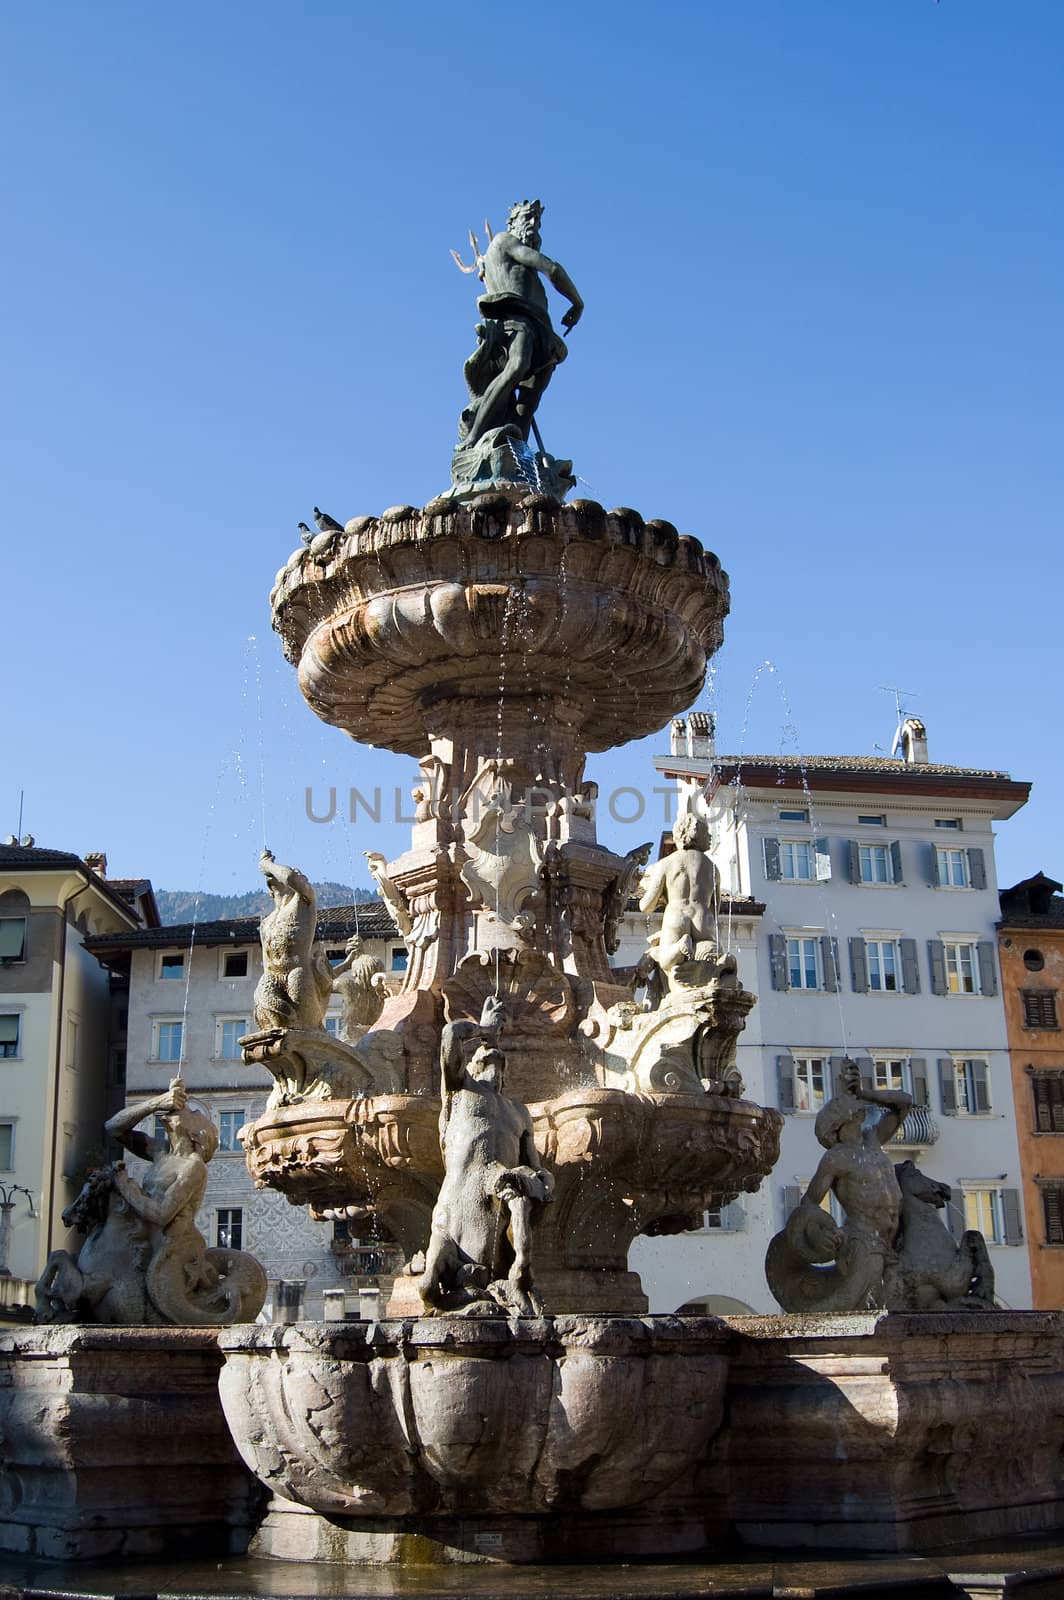 a view from Piazza Duomo of the Neptune's fountain,Trento, Italy